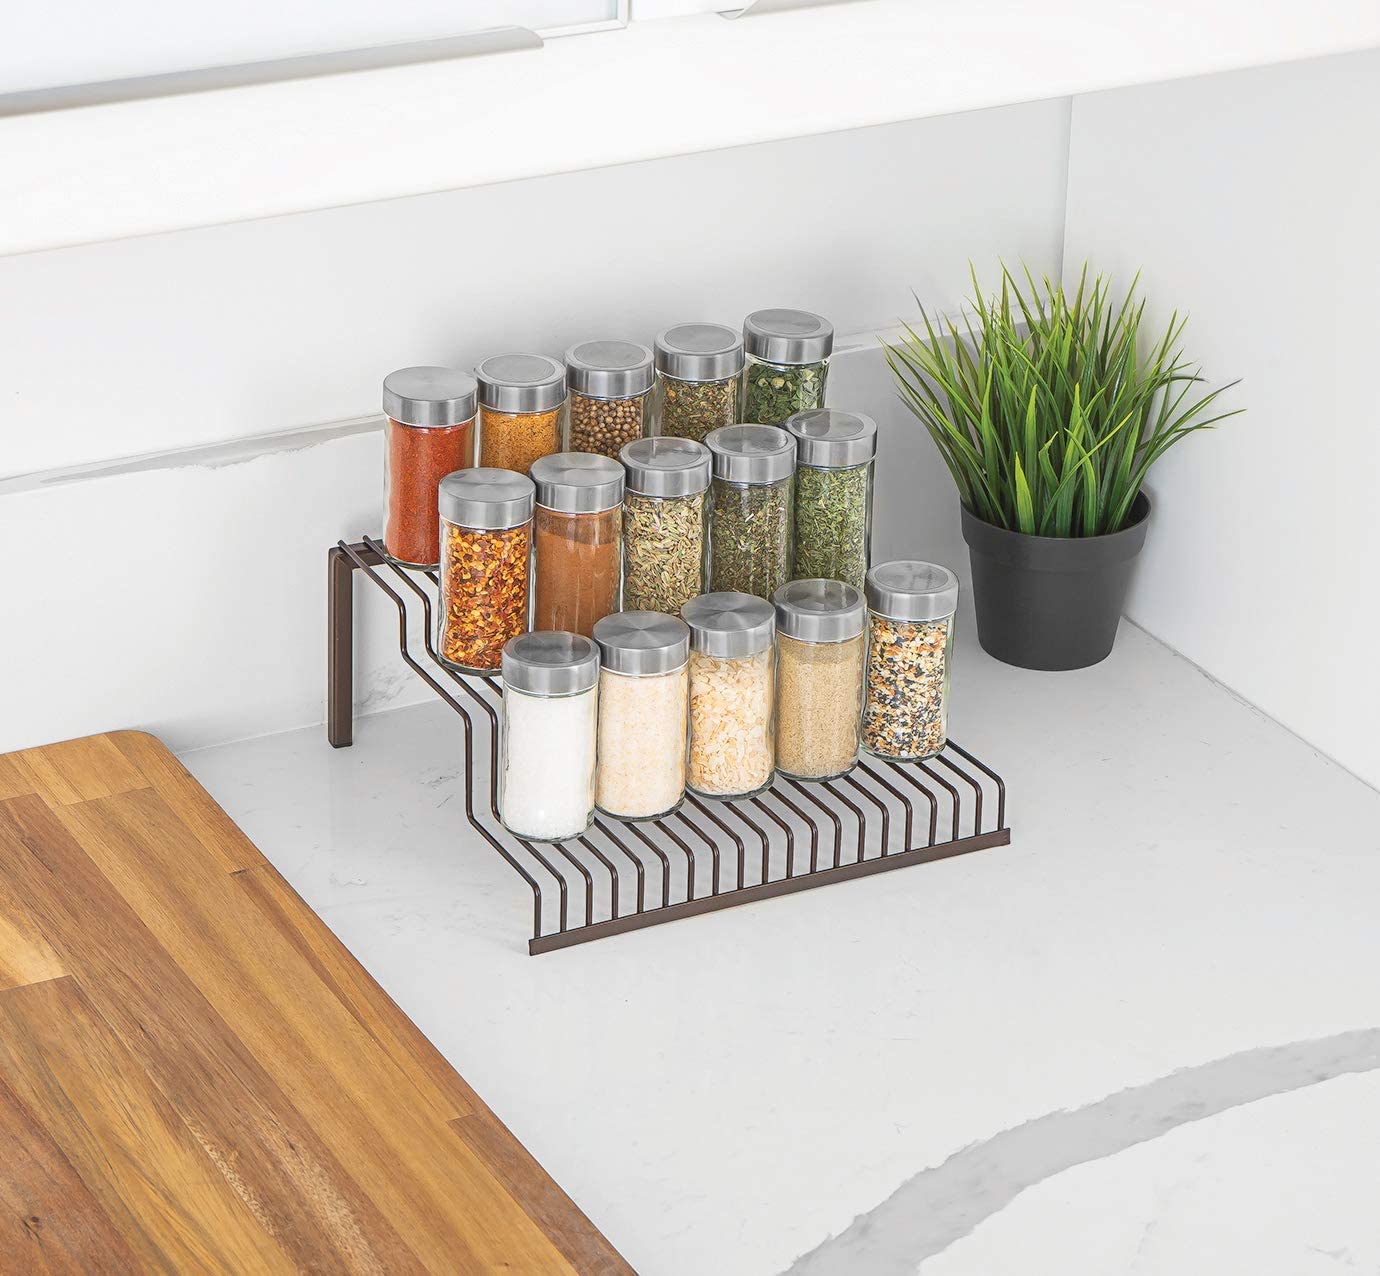 https://cdn.shopify.com/s/files/1/2393/7799/products/heavy-duty-3-tier-spice-rack-smart-design-kitchen-8426118-incrementing-number-263868.jpg?v=1679342217